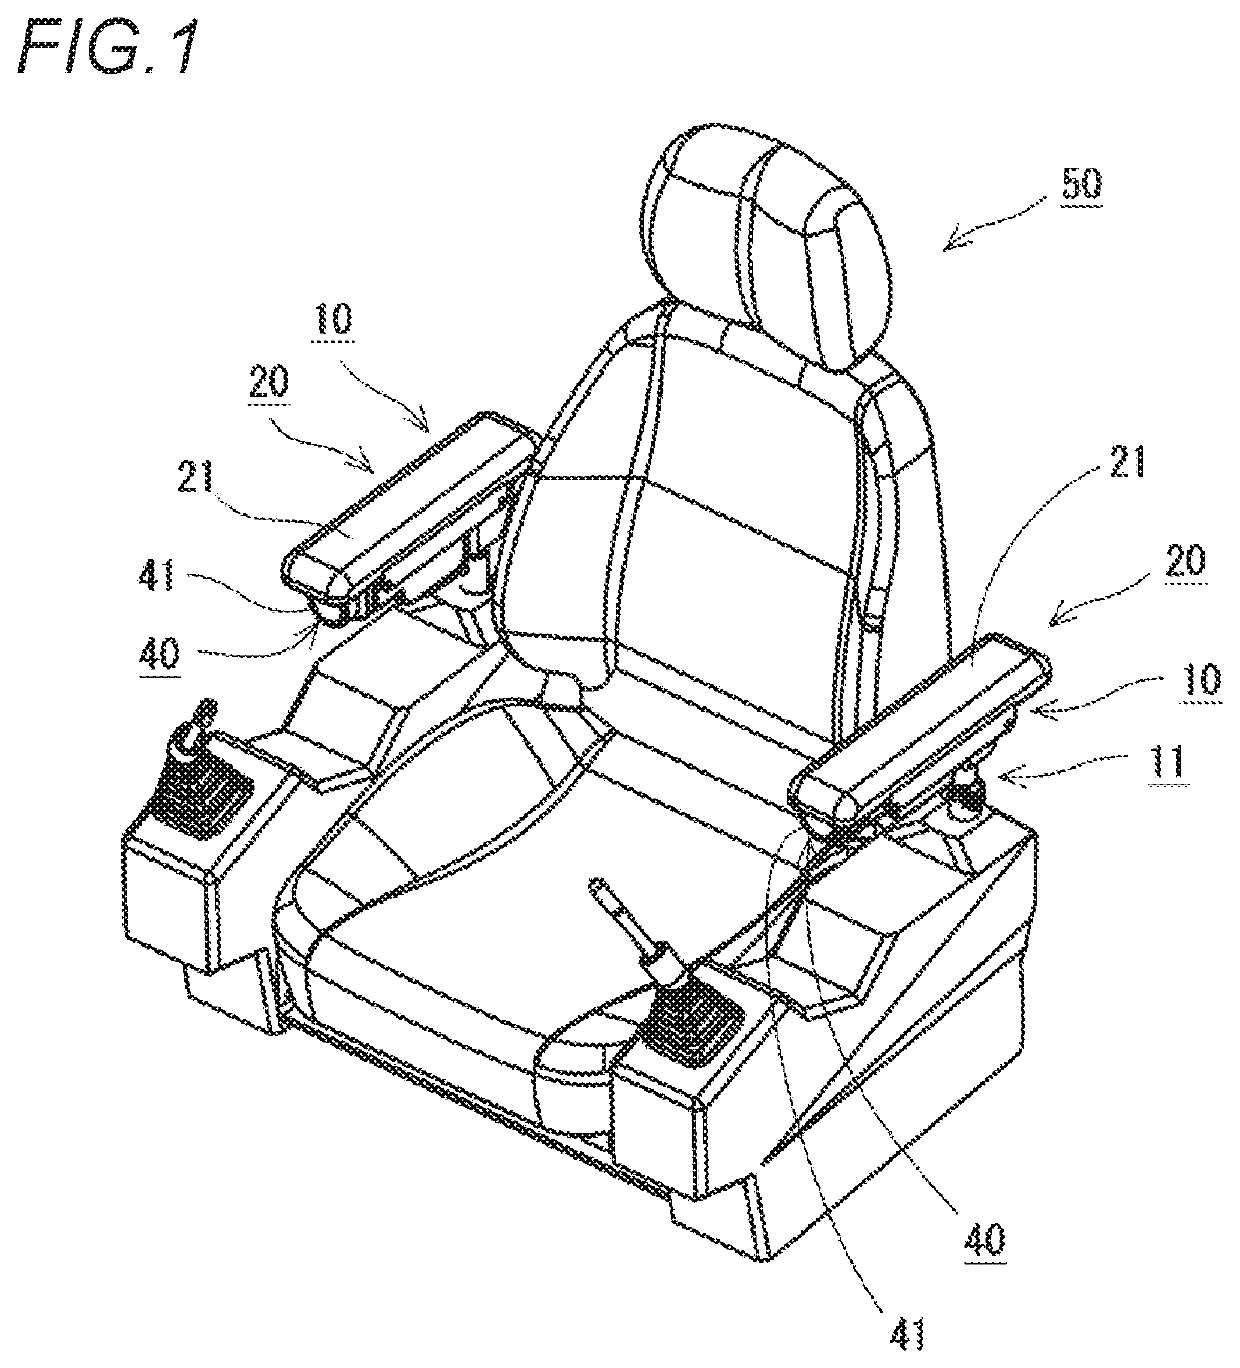 Armrest structure for seat